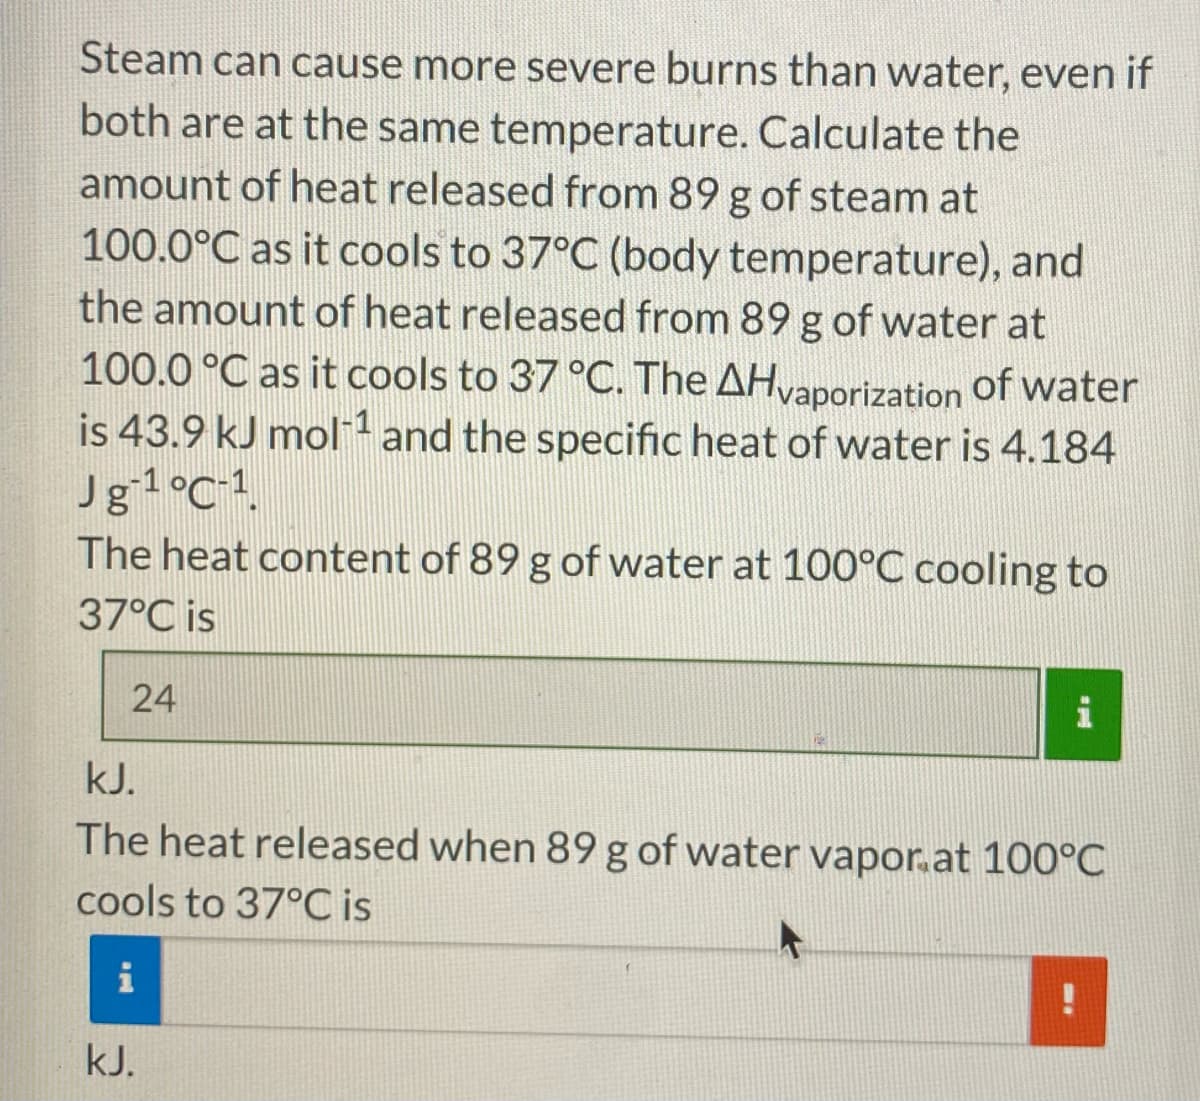 Steam can cause more severe burns than water, even if
both are at the same temperature. Calculate the
amount of heat released from 89 g of steam at
100.0°C as it cools to 37°C (body temperature), and
the amount of heat released from 89 g of water at
100.0 °C as it cools to 37 °C. The AHvaporization of water
is 43.9 kJ mol 1 and the specific heat of water is 4.184
Jg1°C1.
The heat content of 89 g of water at 100°C cooling to
37°C is
24
kJ.
The heat released when 89 g of water vapor.at 100°C
cools to 37°C is
i
kJ.
